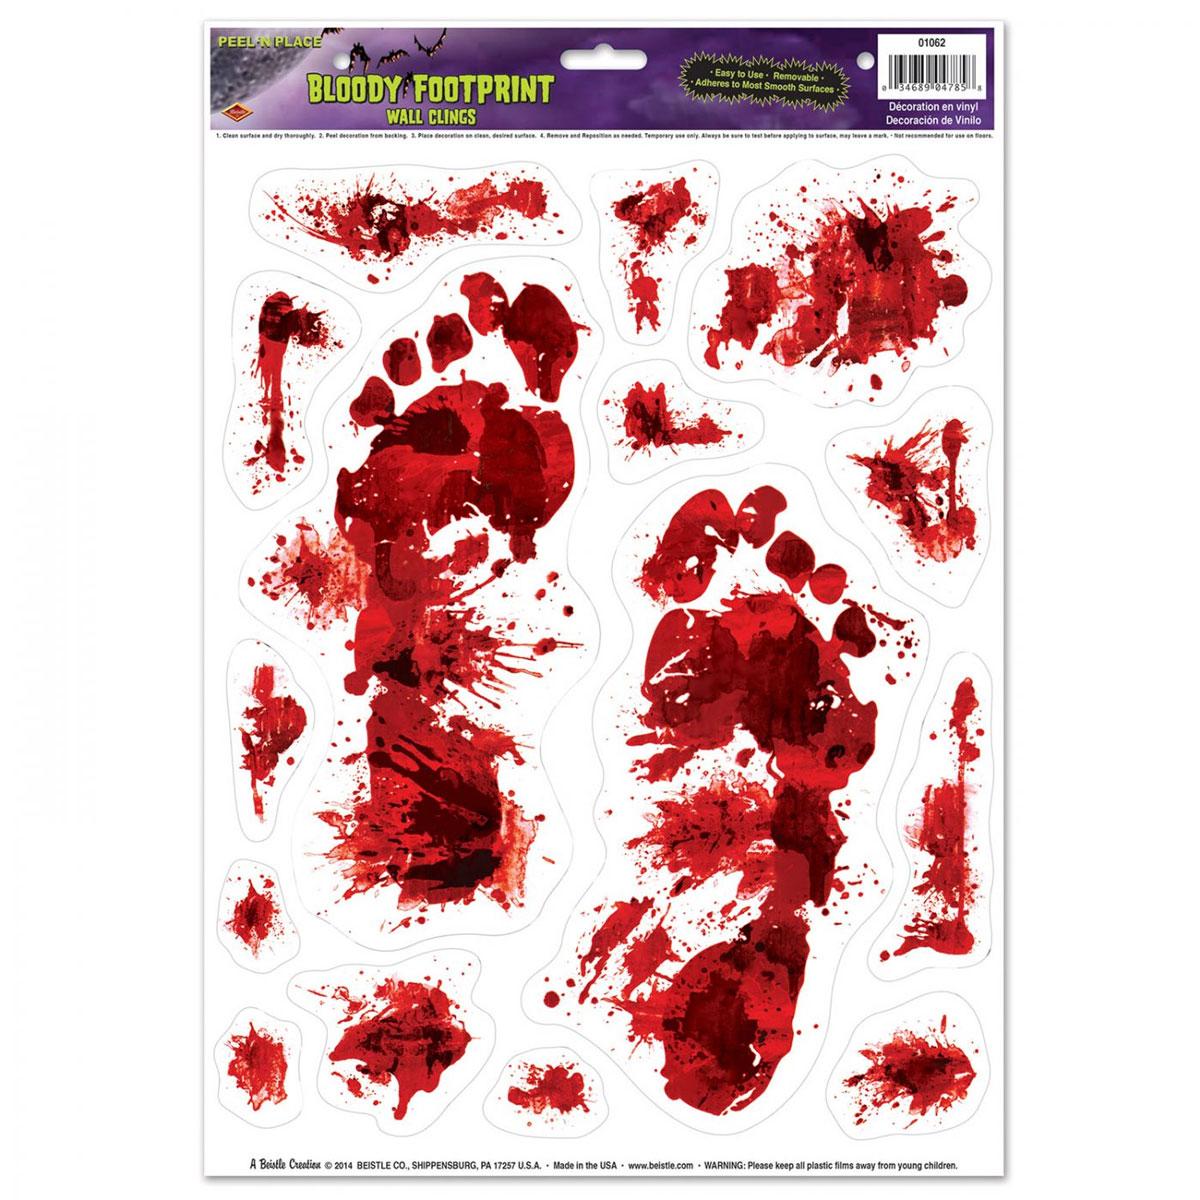 Bloody Footprints and Clings Halloween Decorations by Beistle 01062 available in the UK here at Karnival Costumes online Halloween party shop